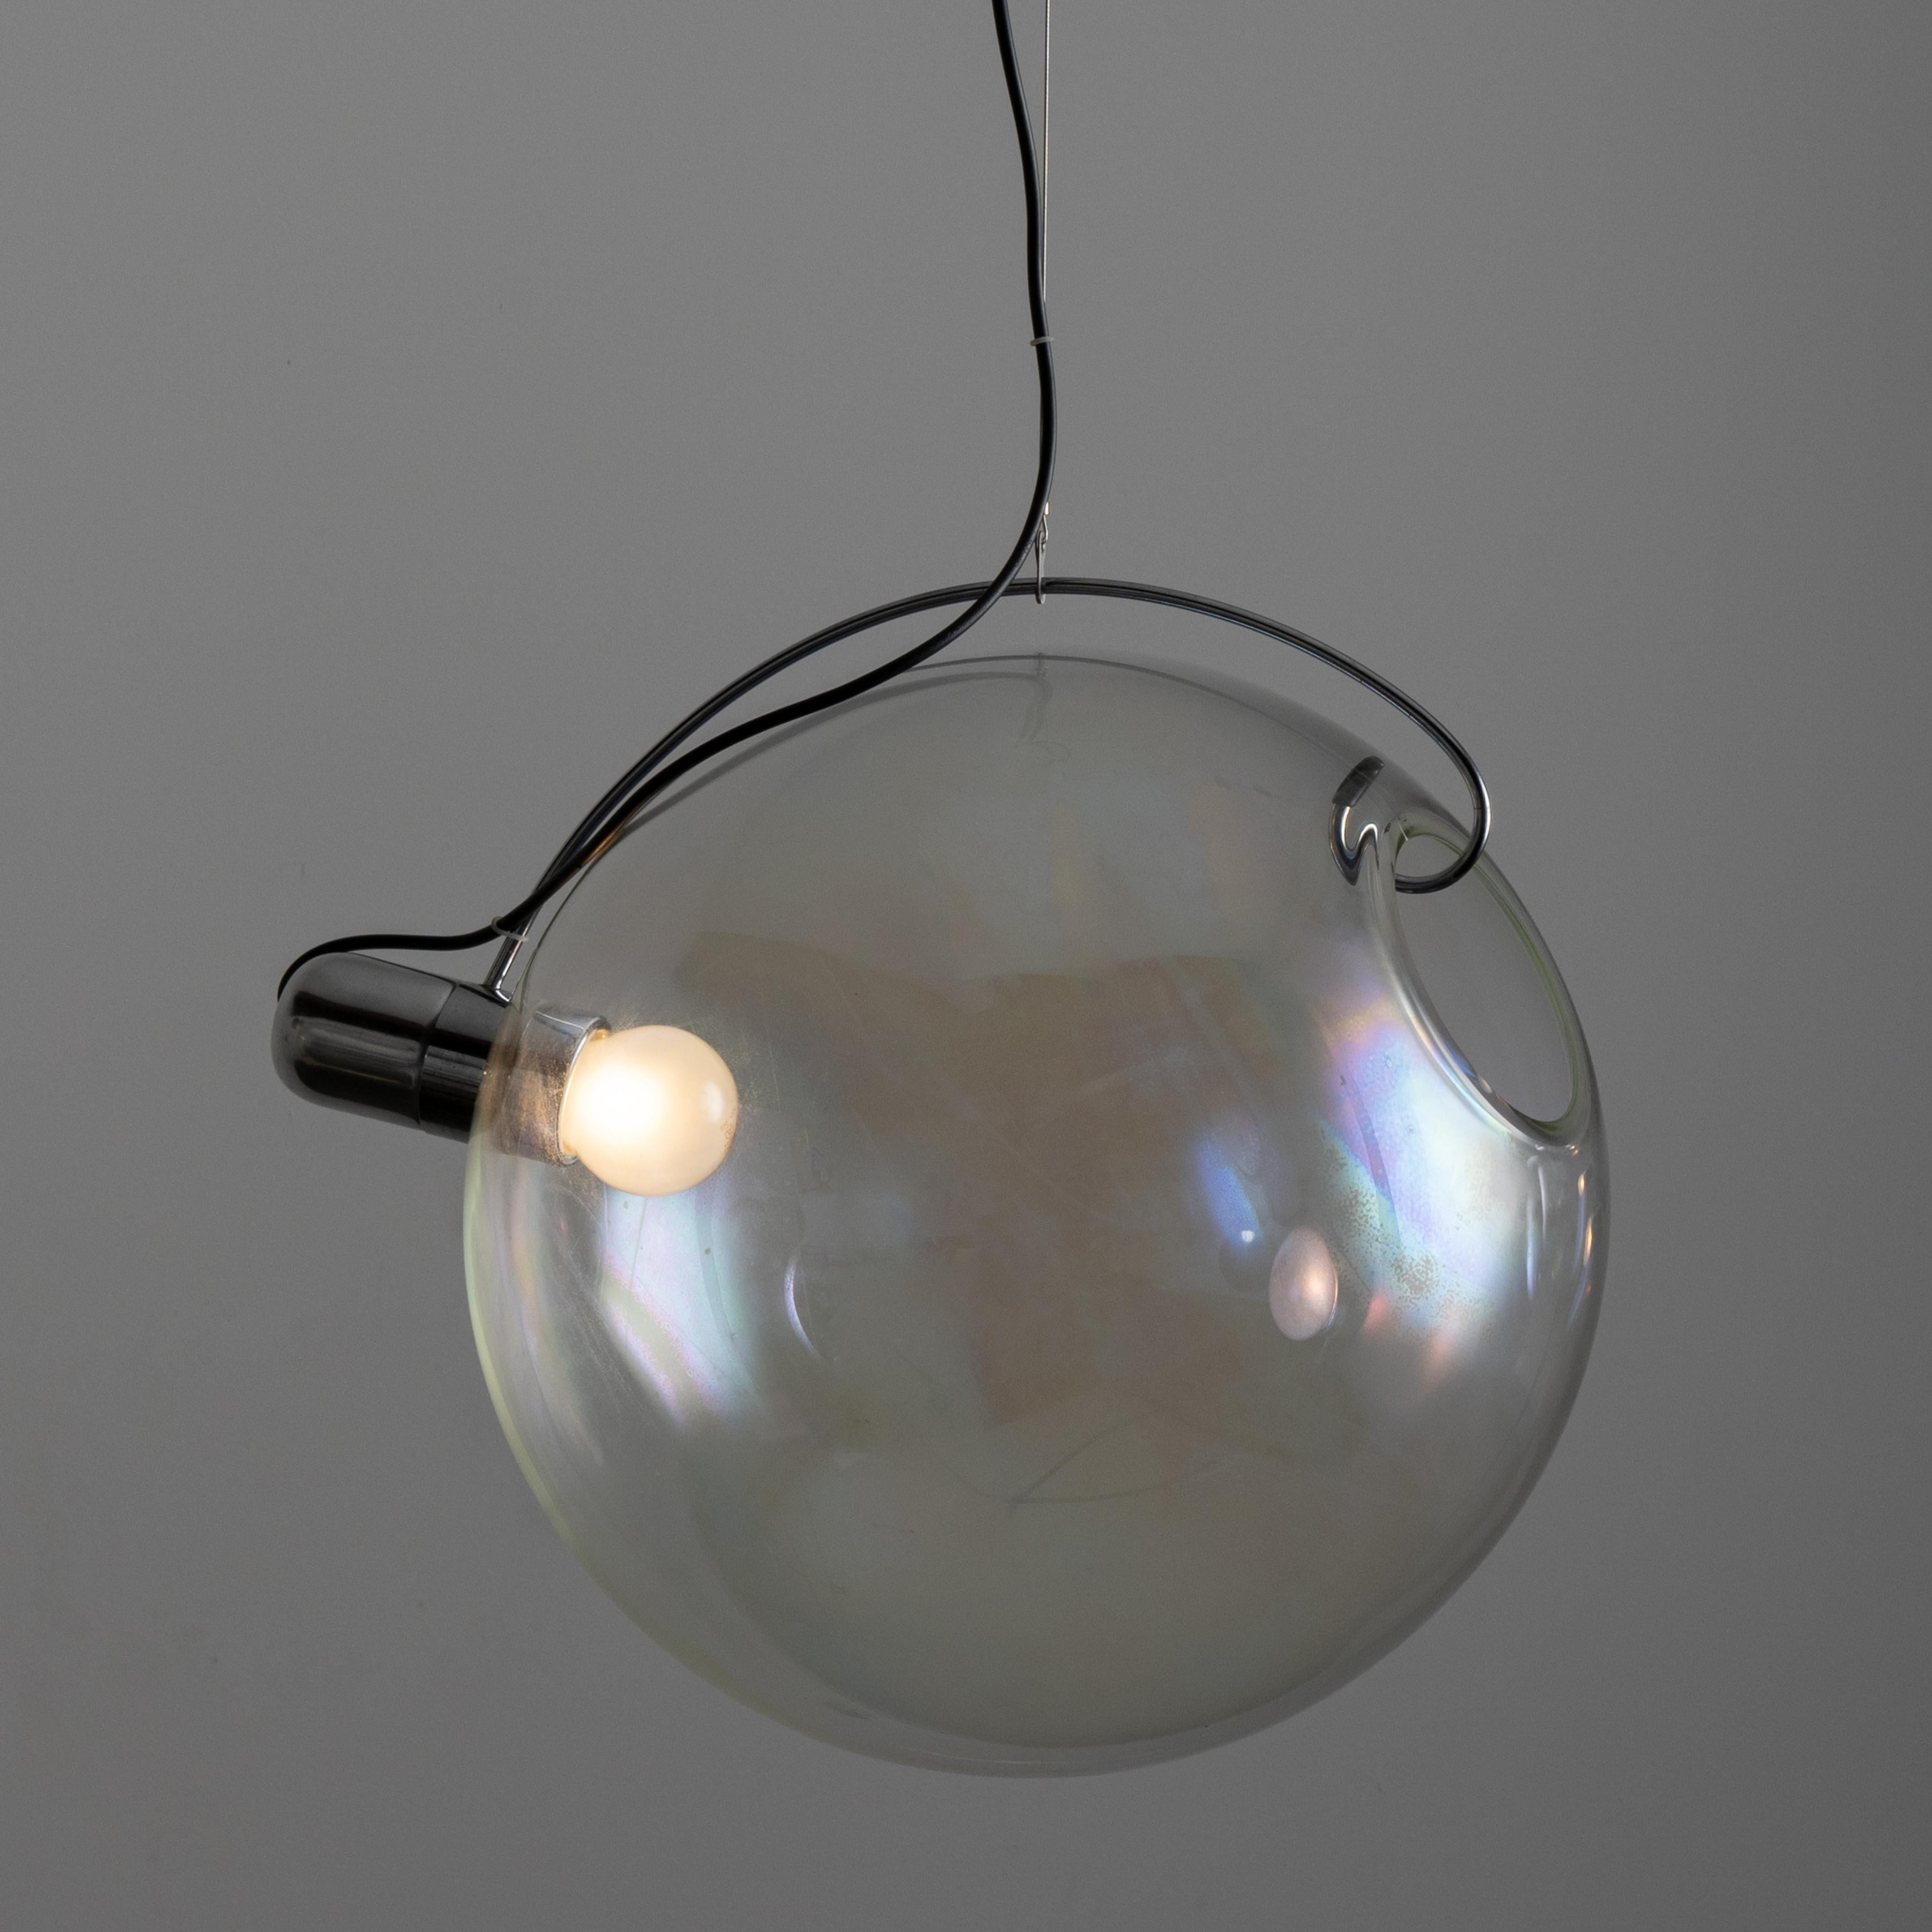 'Sona' Pendant Lamps by Carlo Nason for Lumenform. Designed and manufactured in Italy, in 1973. Visually striking iridescent globes with a minimal suspension system make up these pendants. Both glass globes vary in translucency. Each light holds a